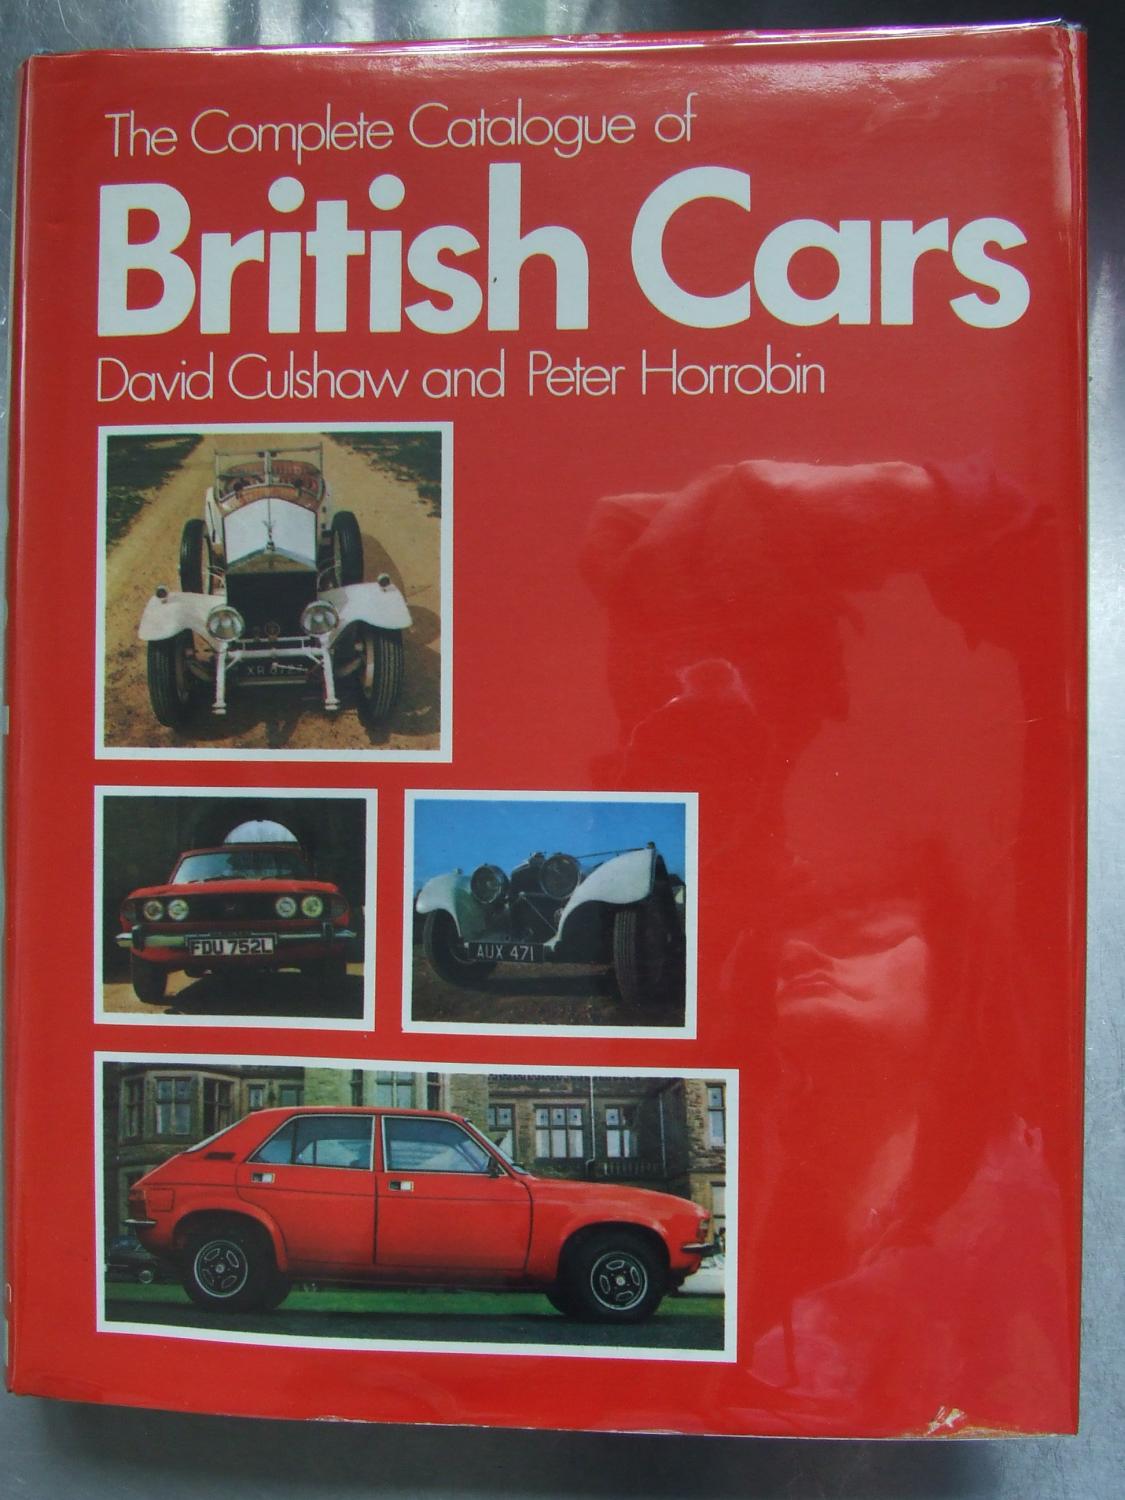 The Complete Catalogue of British Cars